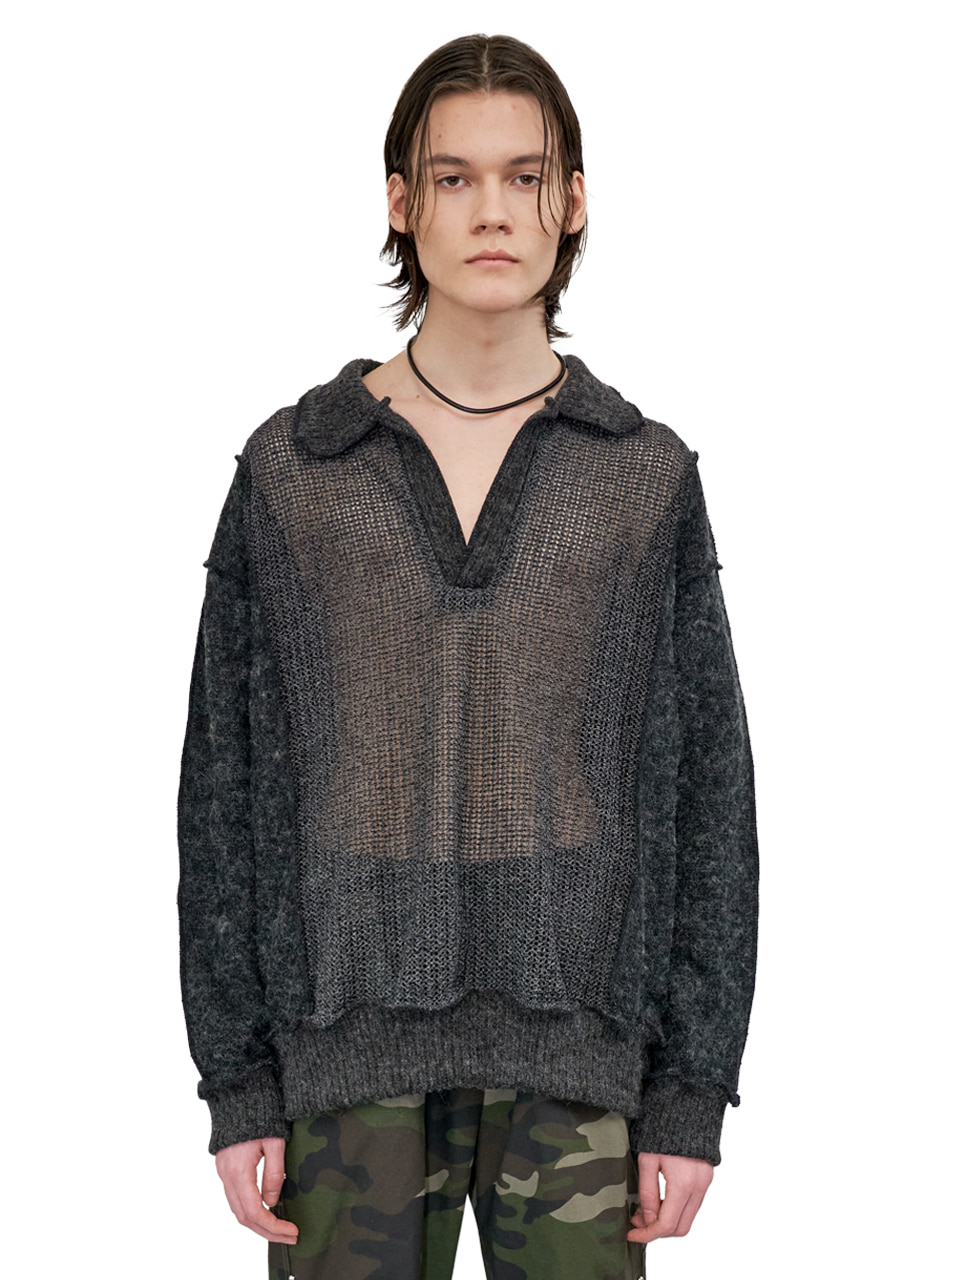 INSIDE-OUT MESH MIX KNIT PK_[CHARCOAL]